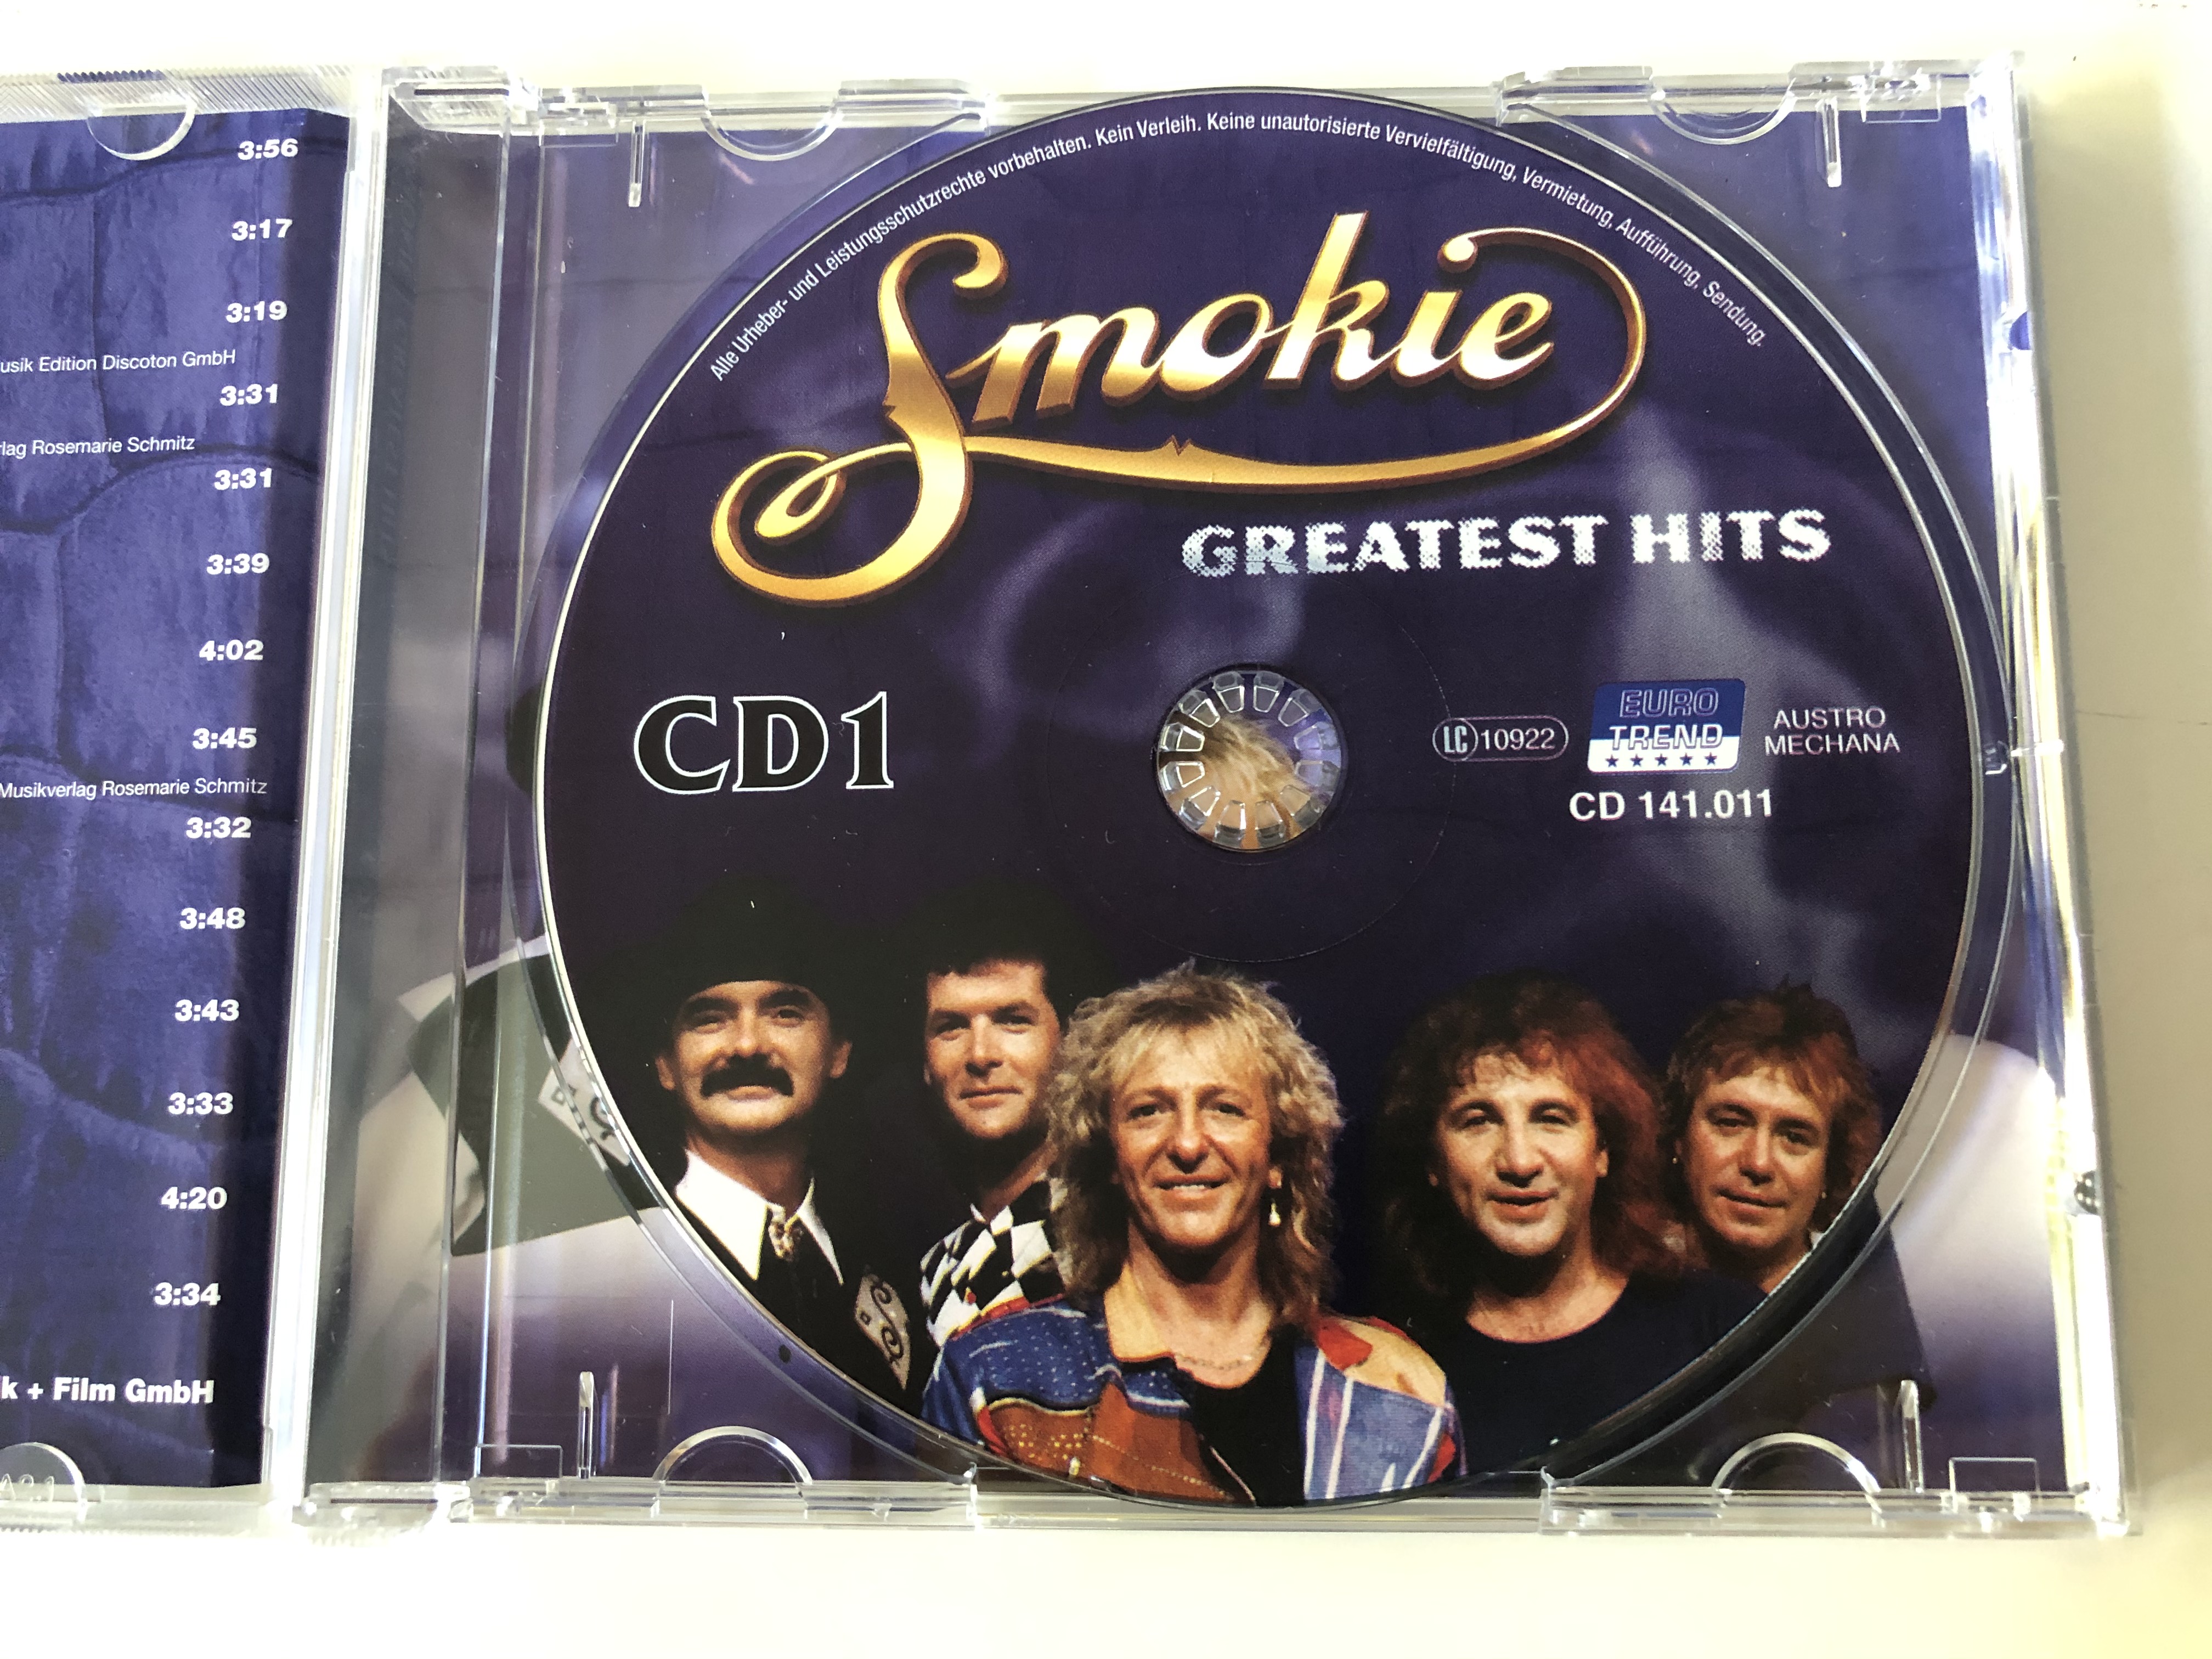 smokie-greatest-hits-cd-1-if-you-think-you-know-how-to-love-me-i-ll-meet-you-at-midnight-don-t-play-your-rock-n-roll-to-me-my-heart-is-true-a.m.o.-eurotrend-audio-cd-cd-141-3-.jpg